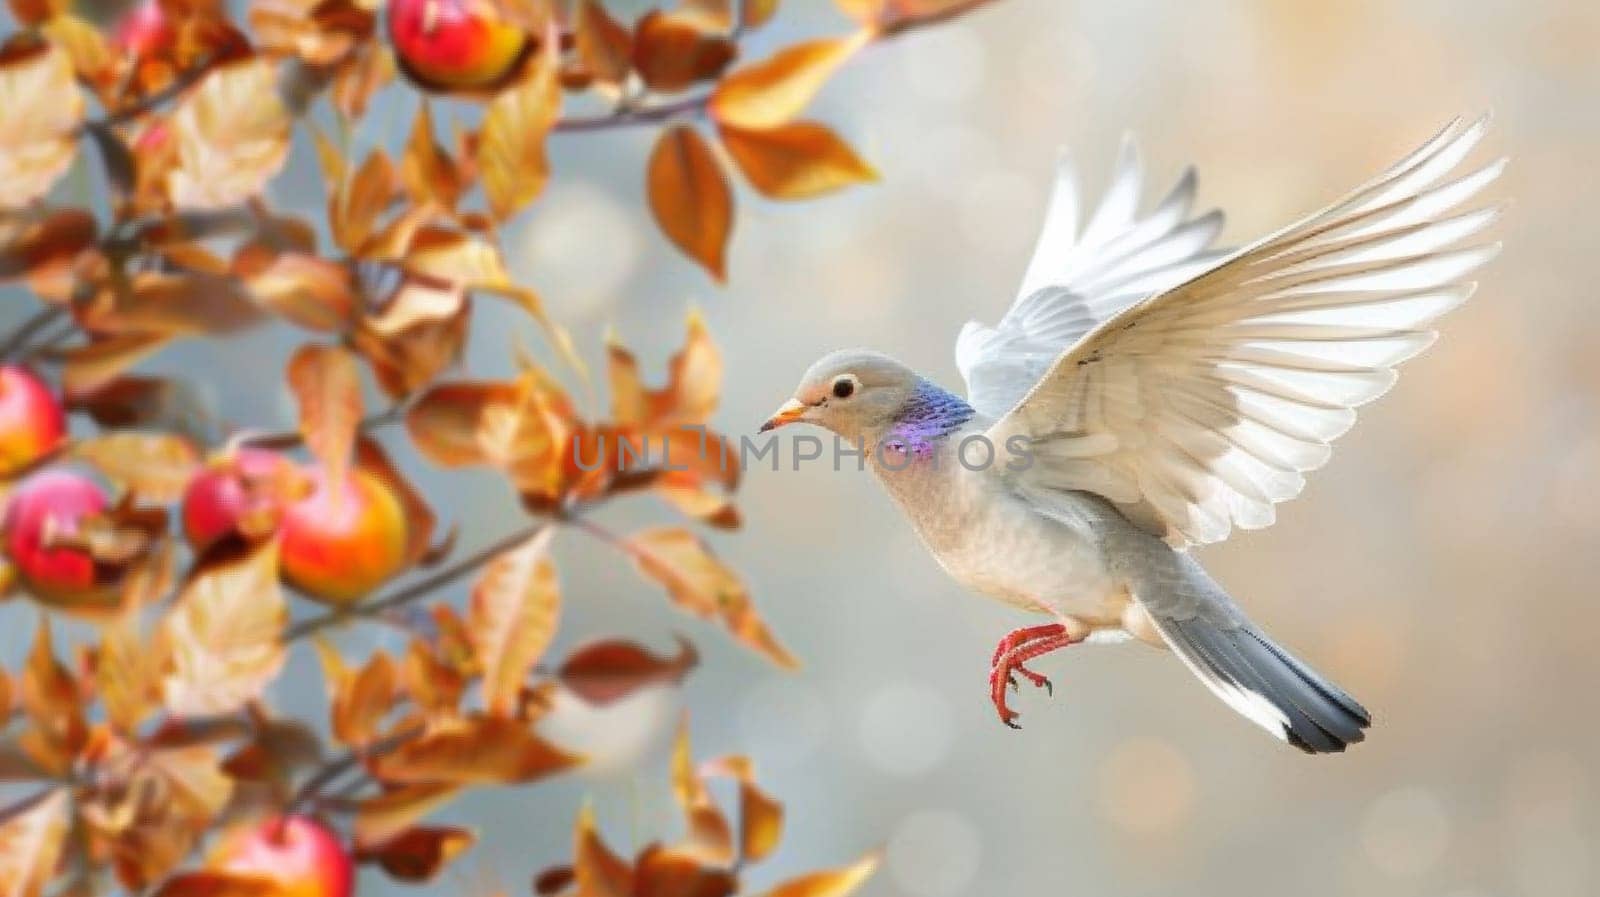 A bird flying in the air over a tree with fruit